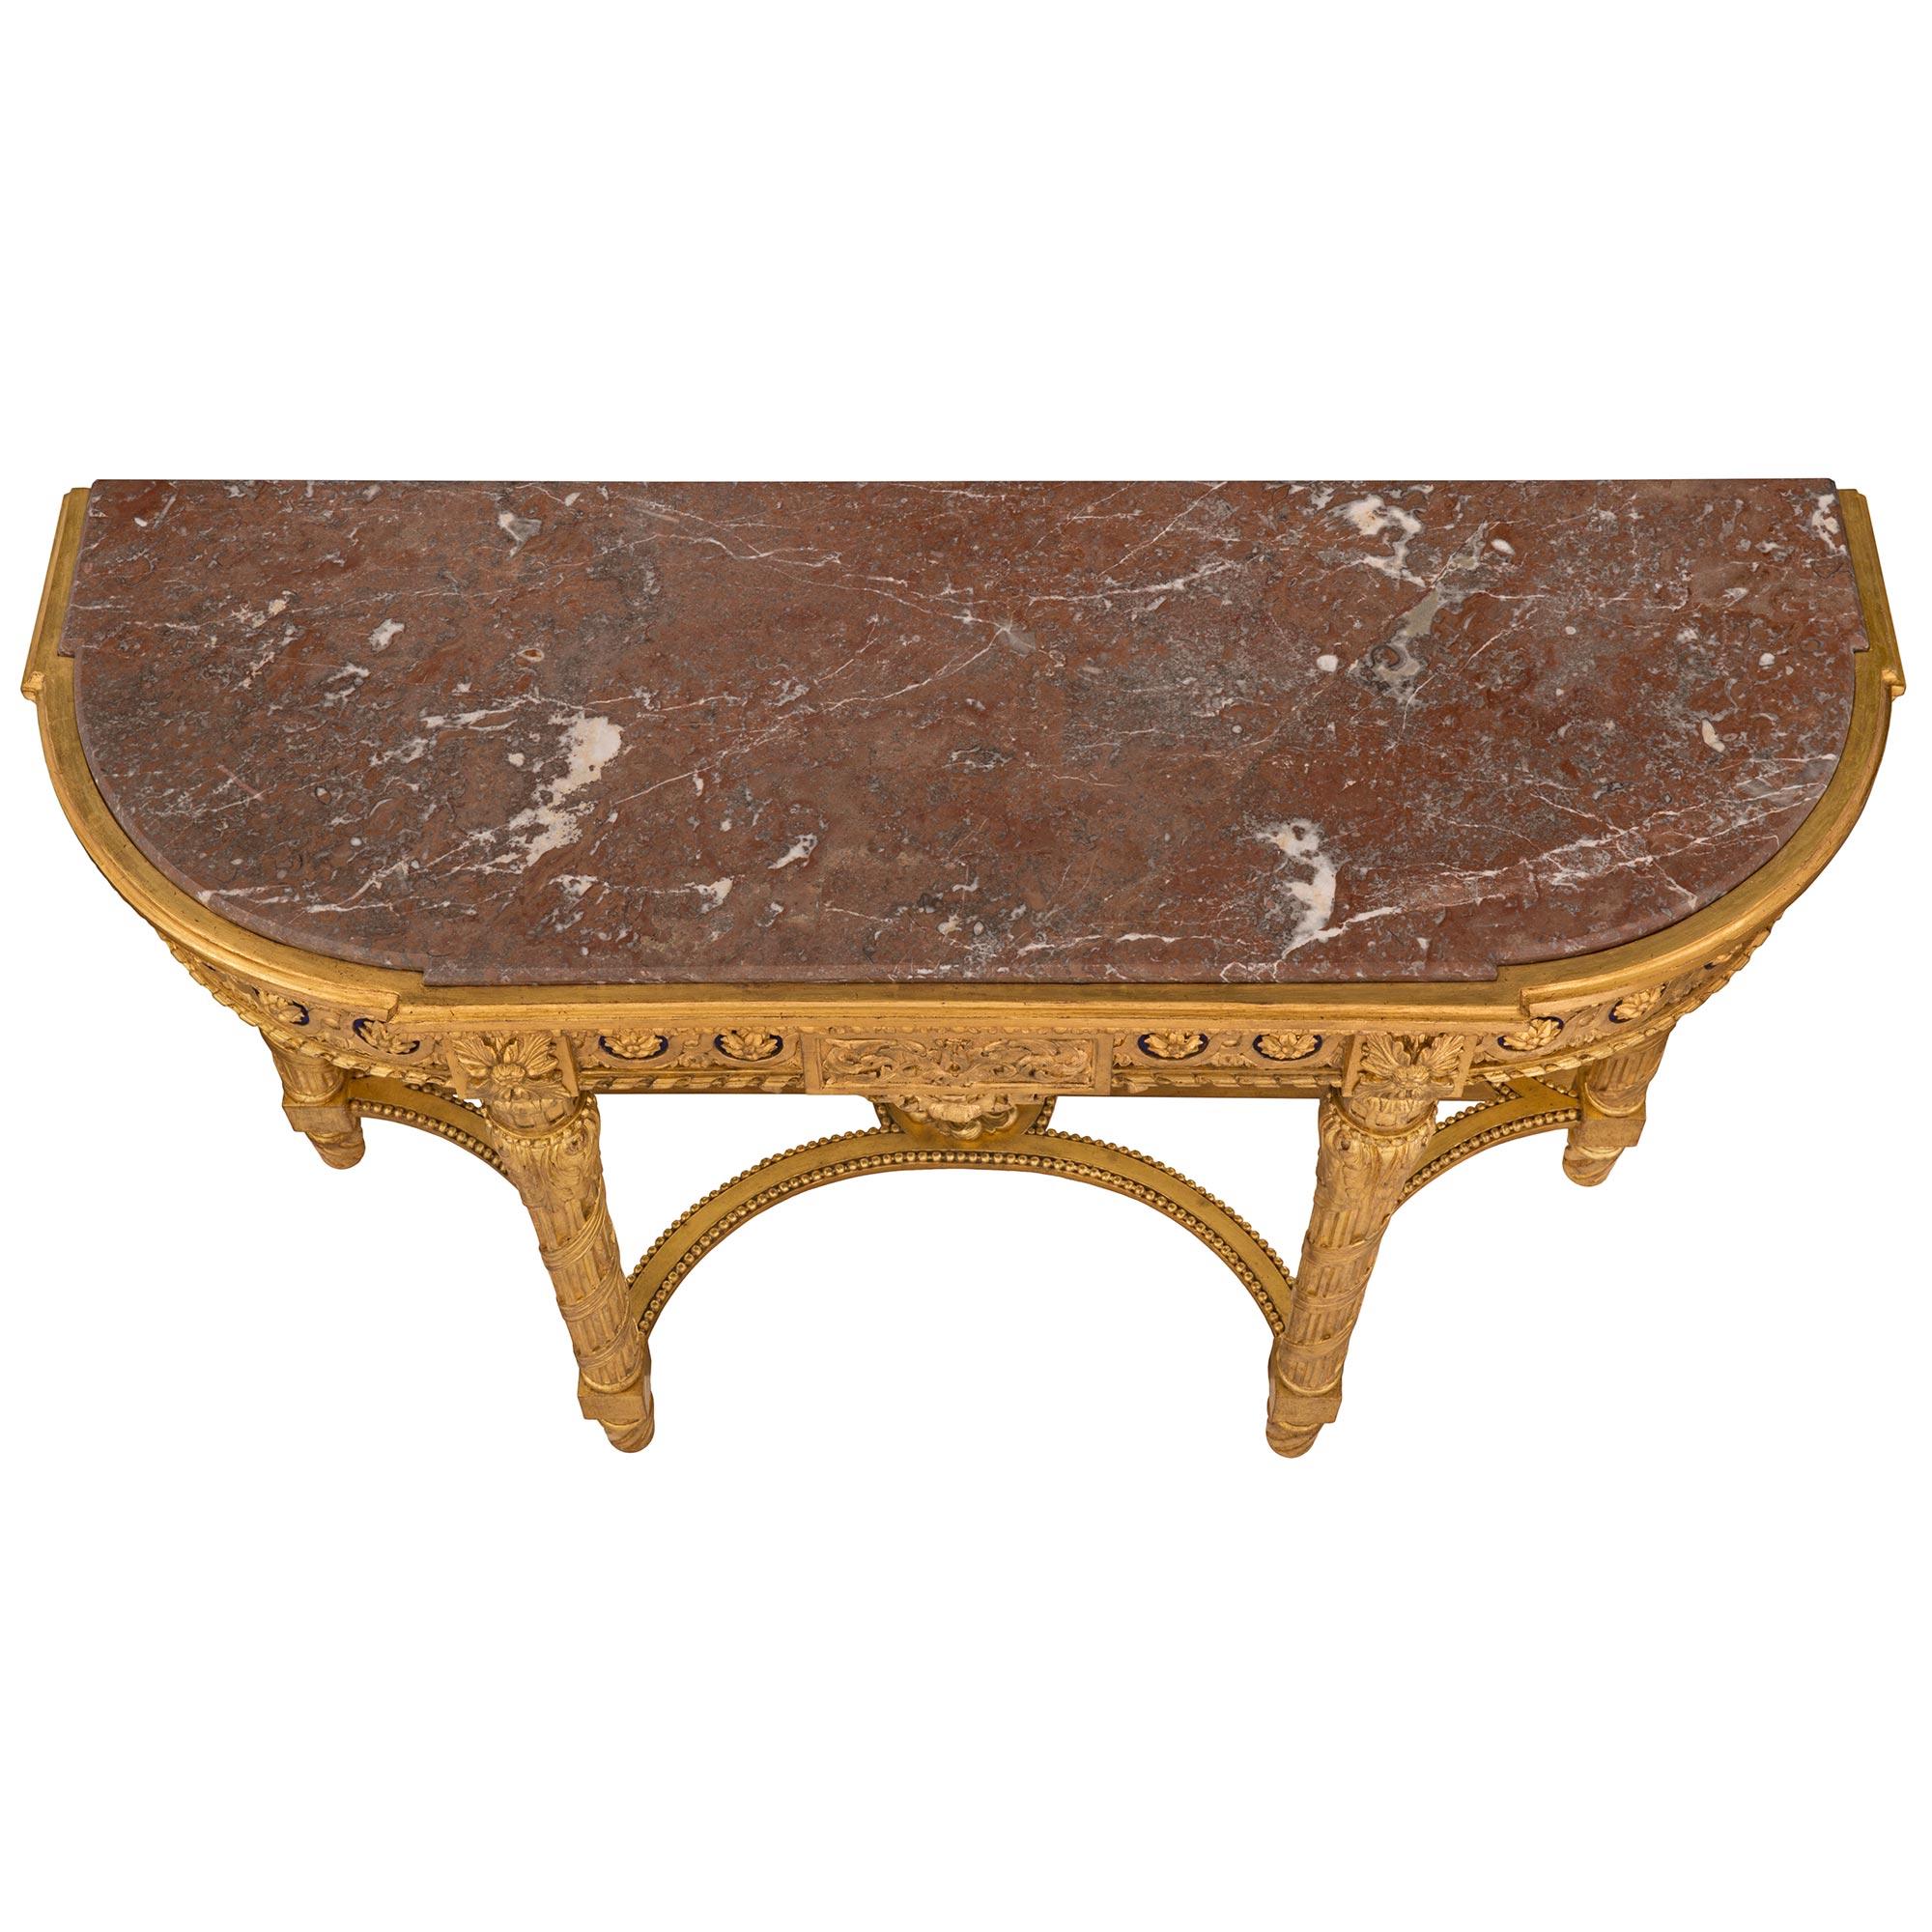 A stunning and most unique French 19th century Louis XVI st. Belle Époque period giltwood and marble mirrored console. The console is raised by elegant spiral fluted feet below striking lightly tapered circular fluted legs with an exceptional wrap